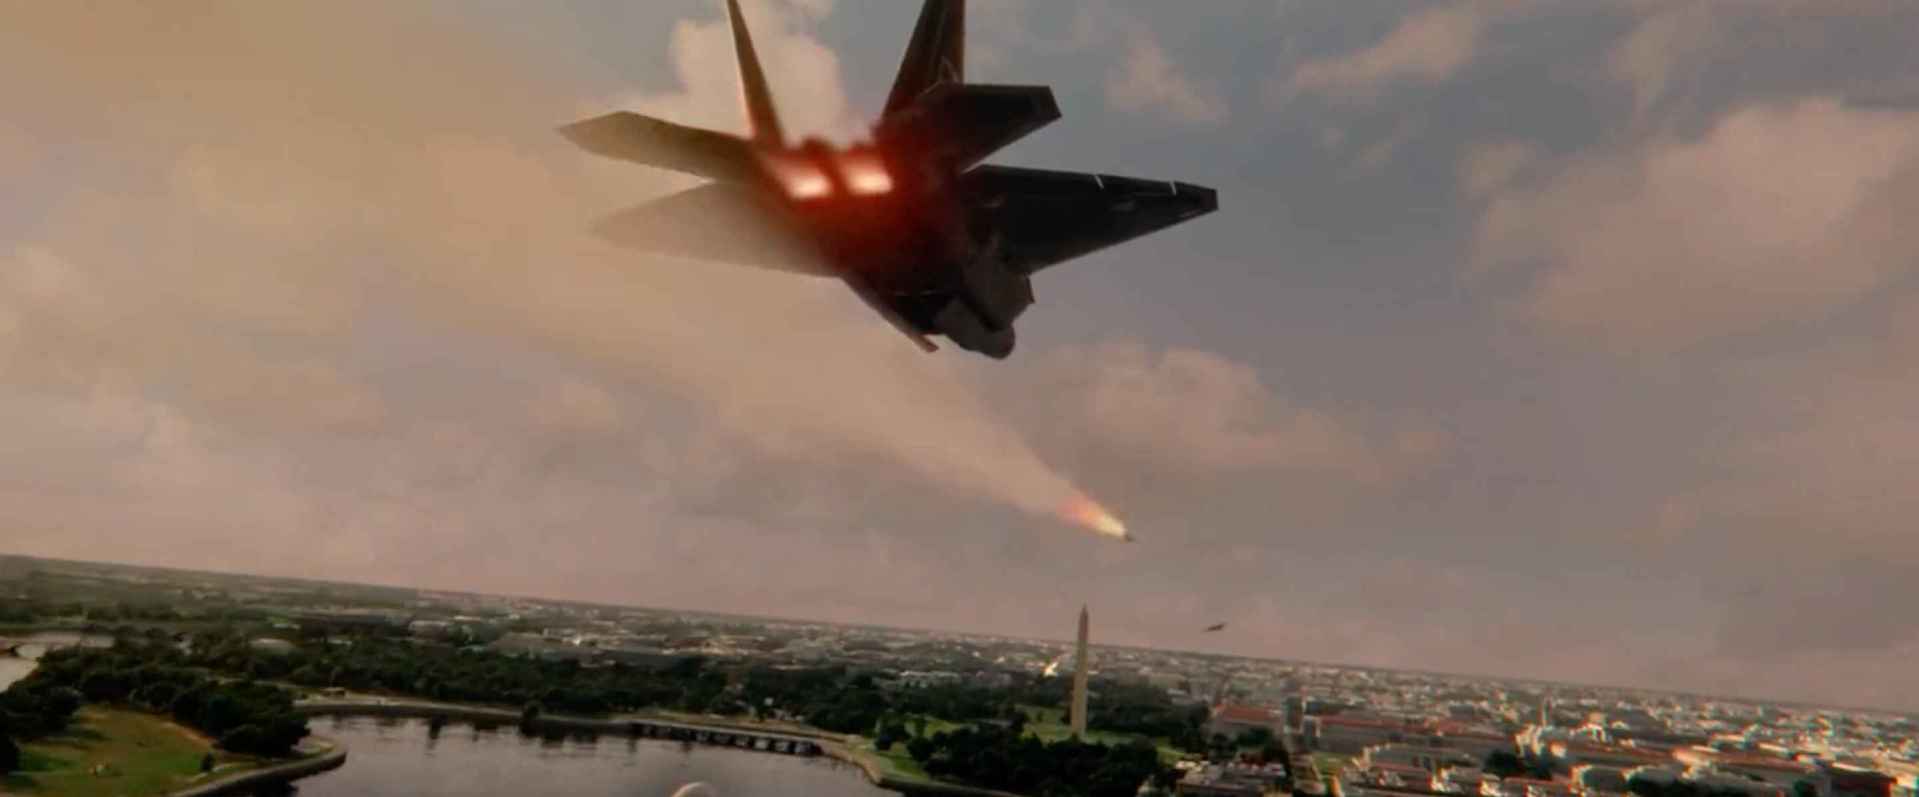 Olympus Has Fallen (2013) A jet attempts to shoot down the enemy gunship